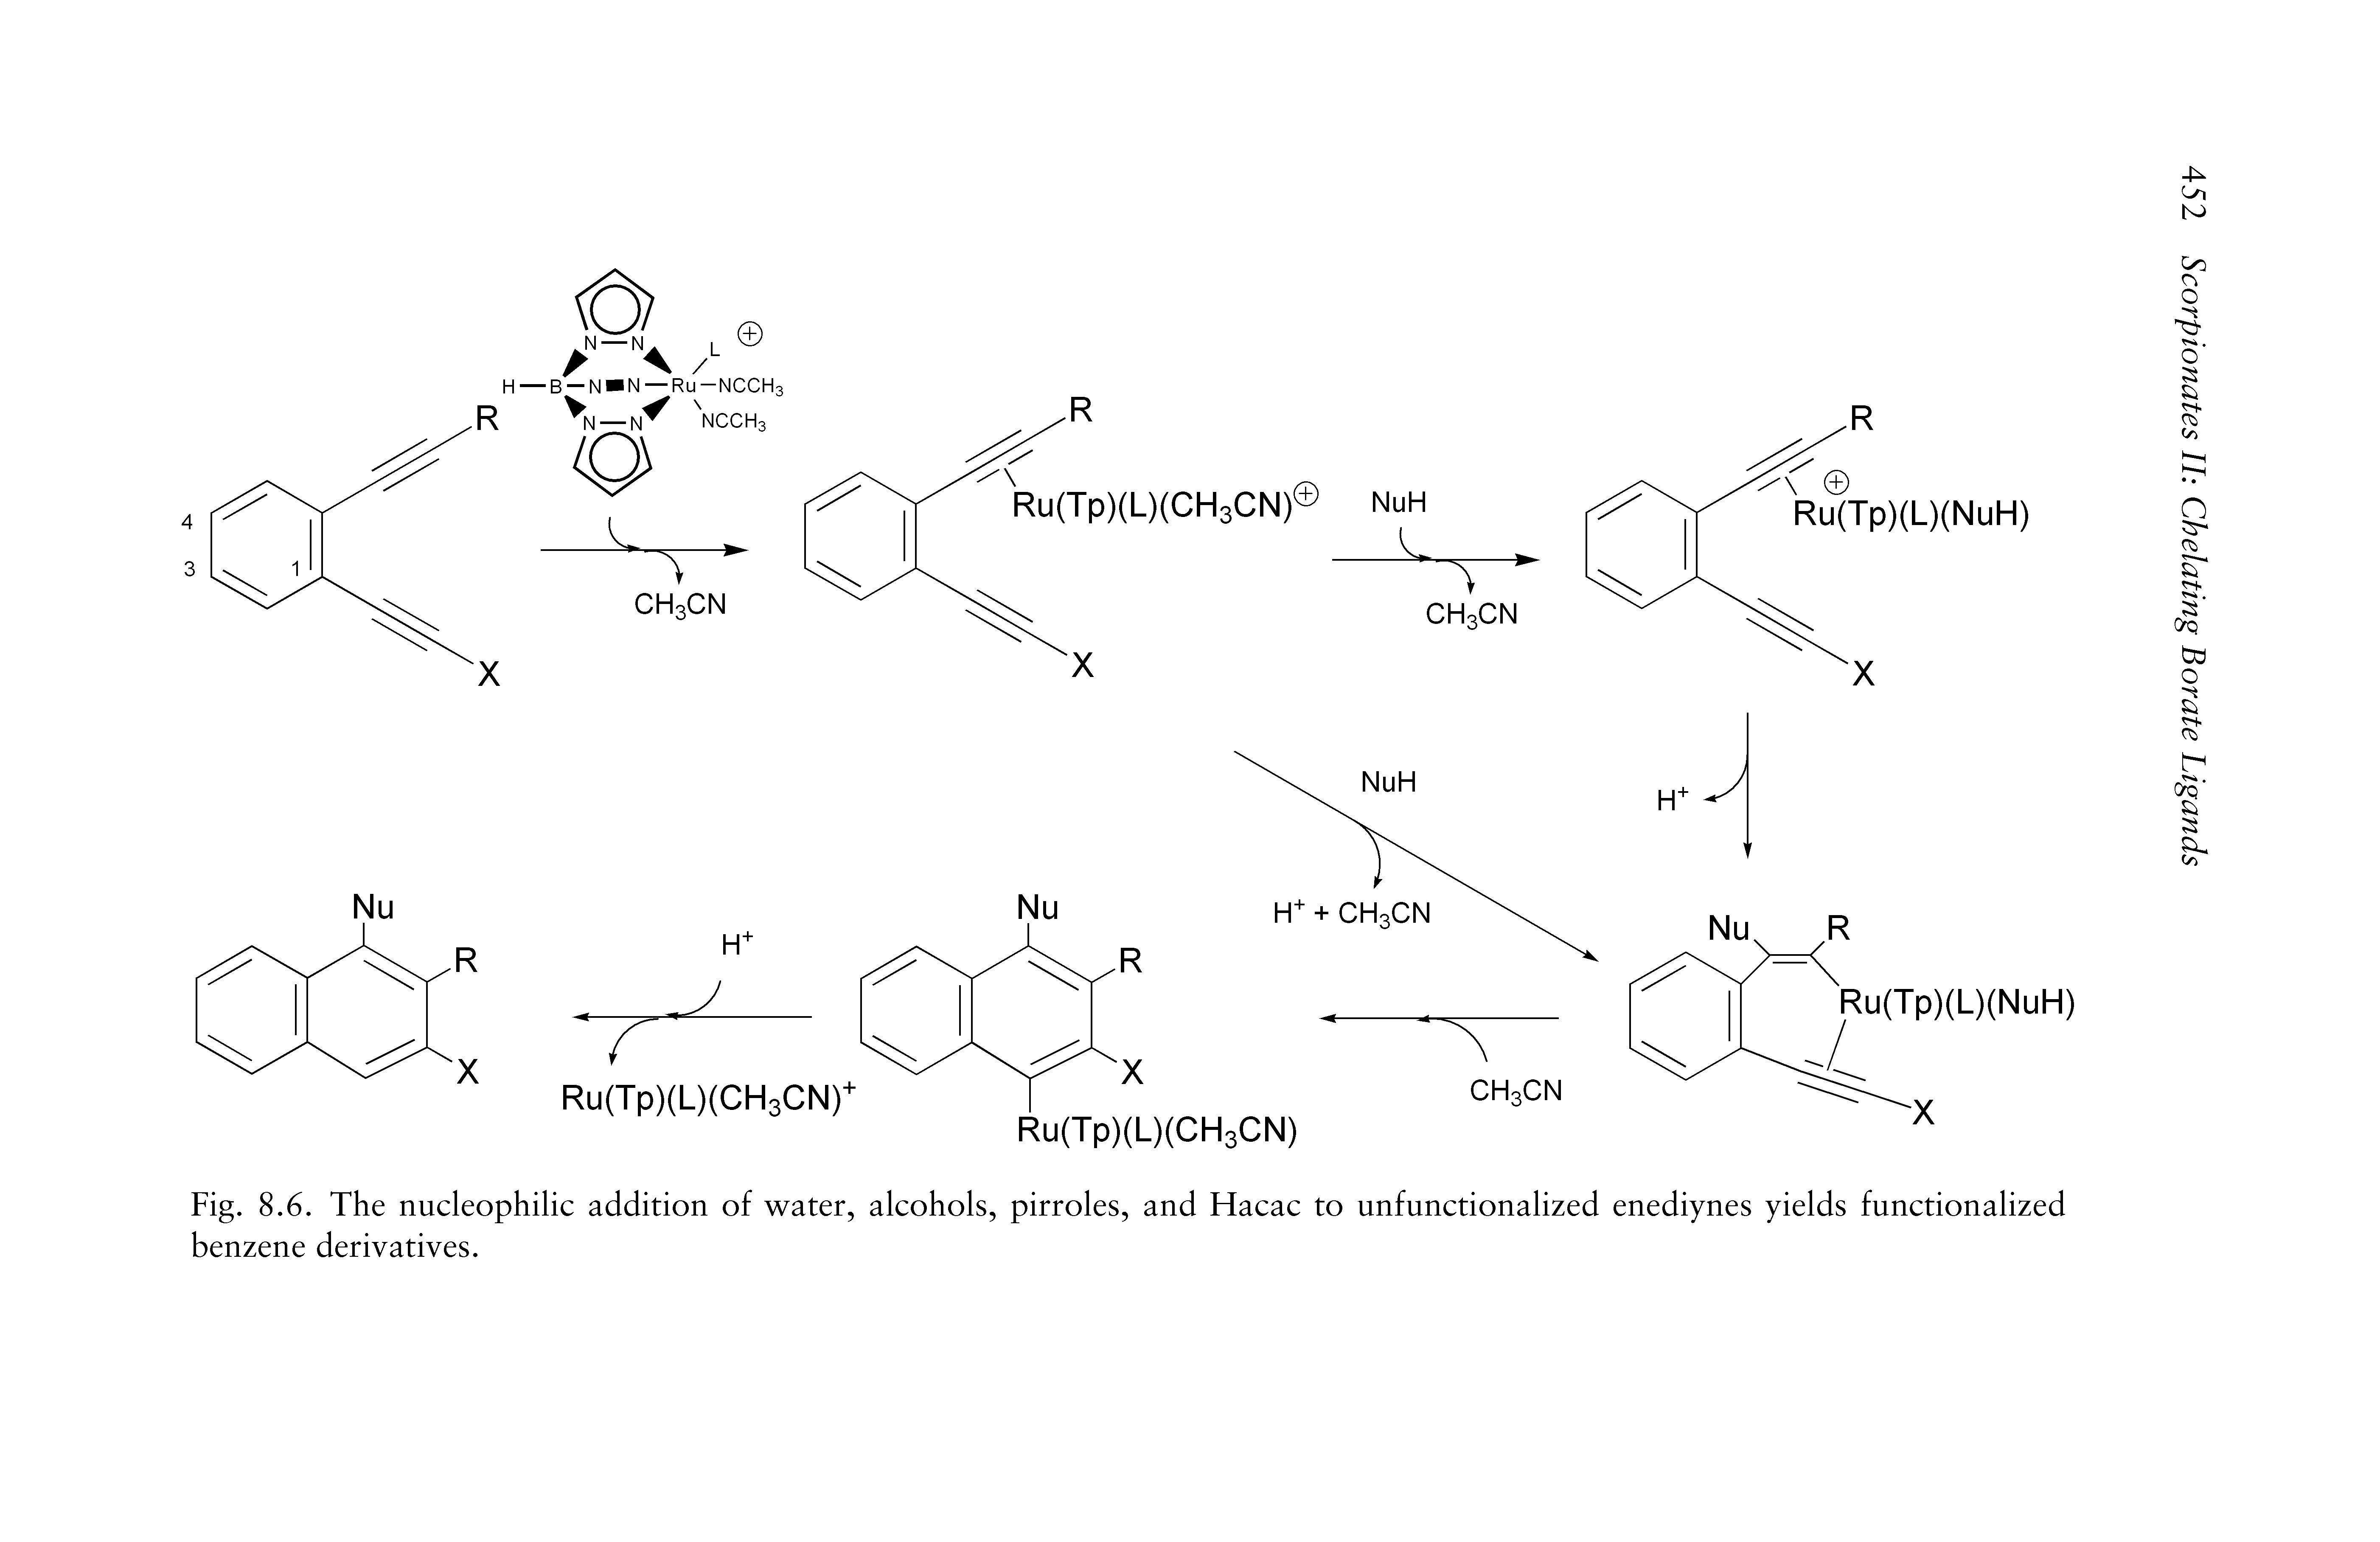 Fig. 8.6. The nucleophilic addition of water, alcohols, pirroles, and Hacac to unfunctionalized enediynes yields functionalized benzene derivatives.